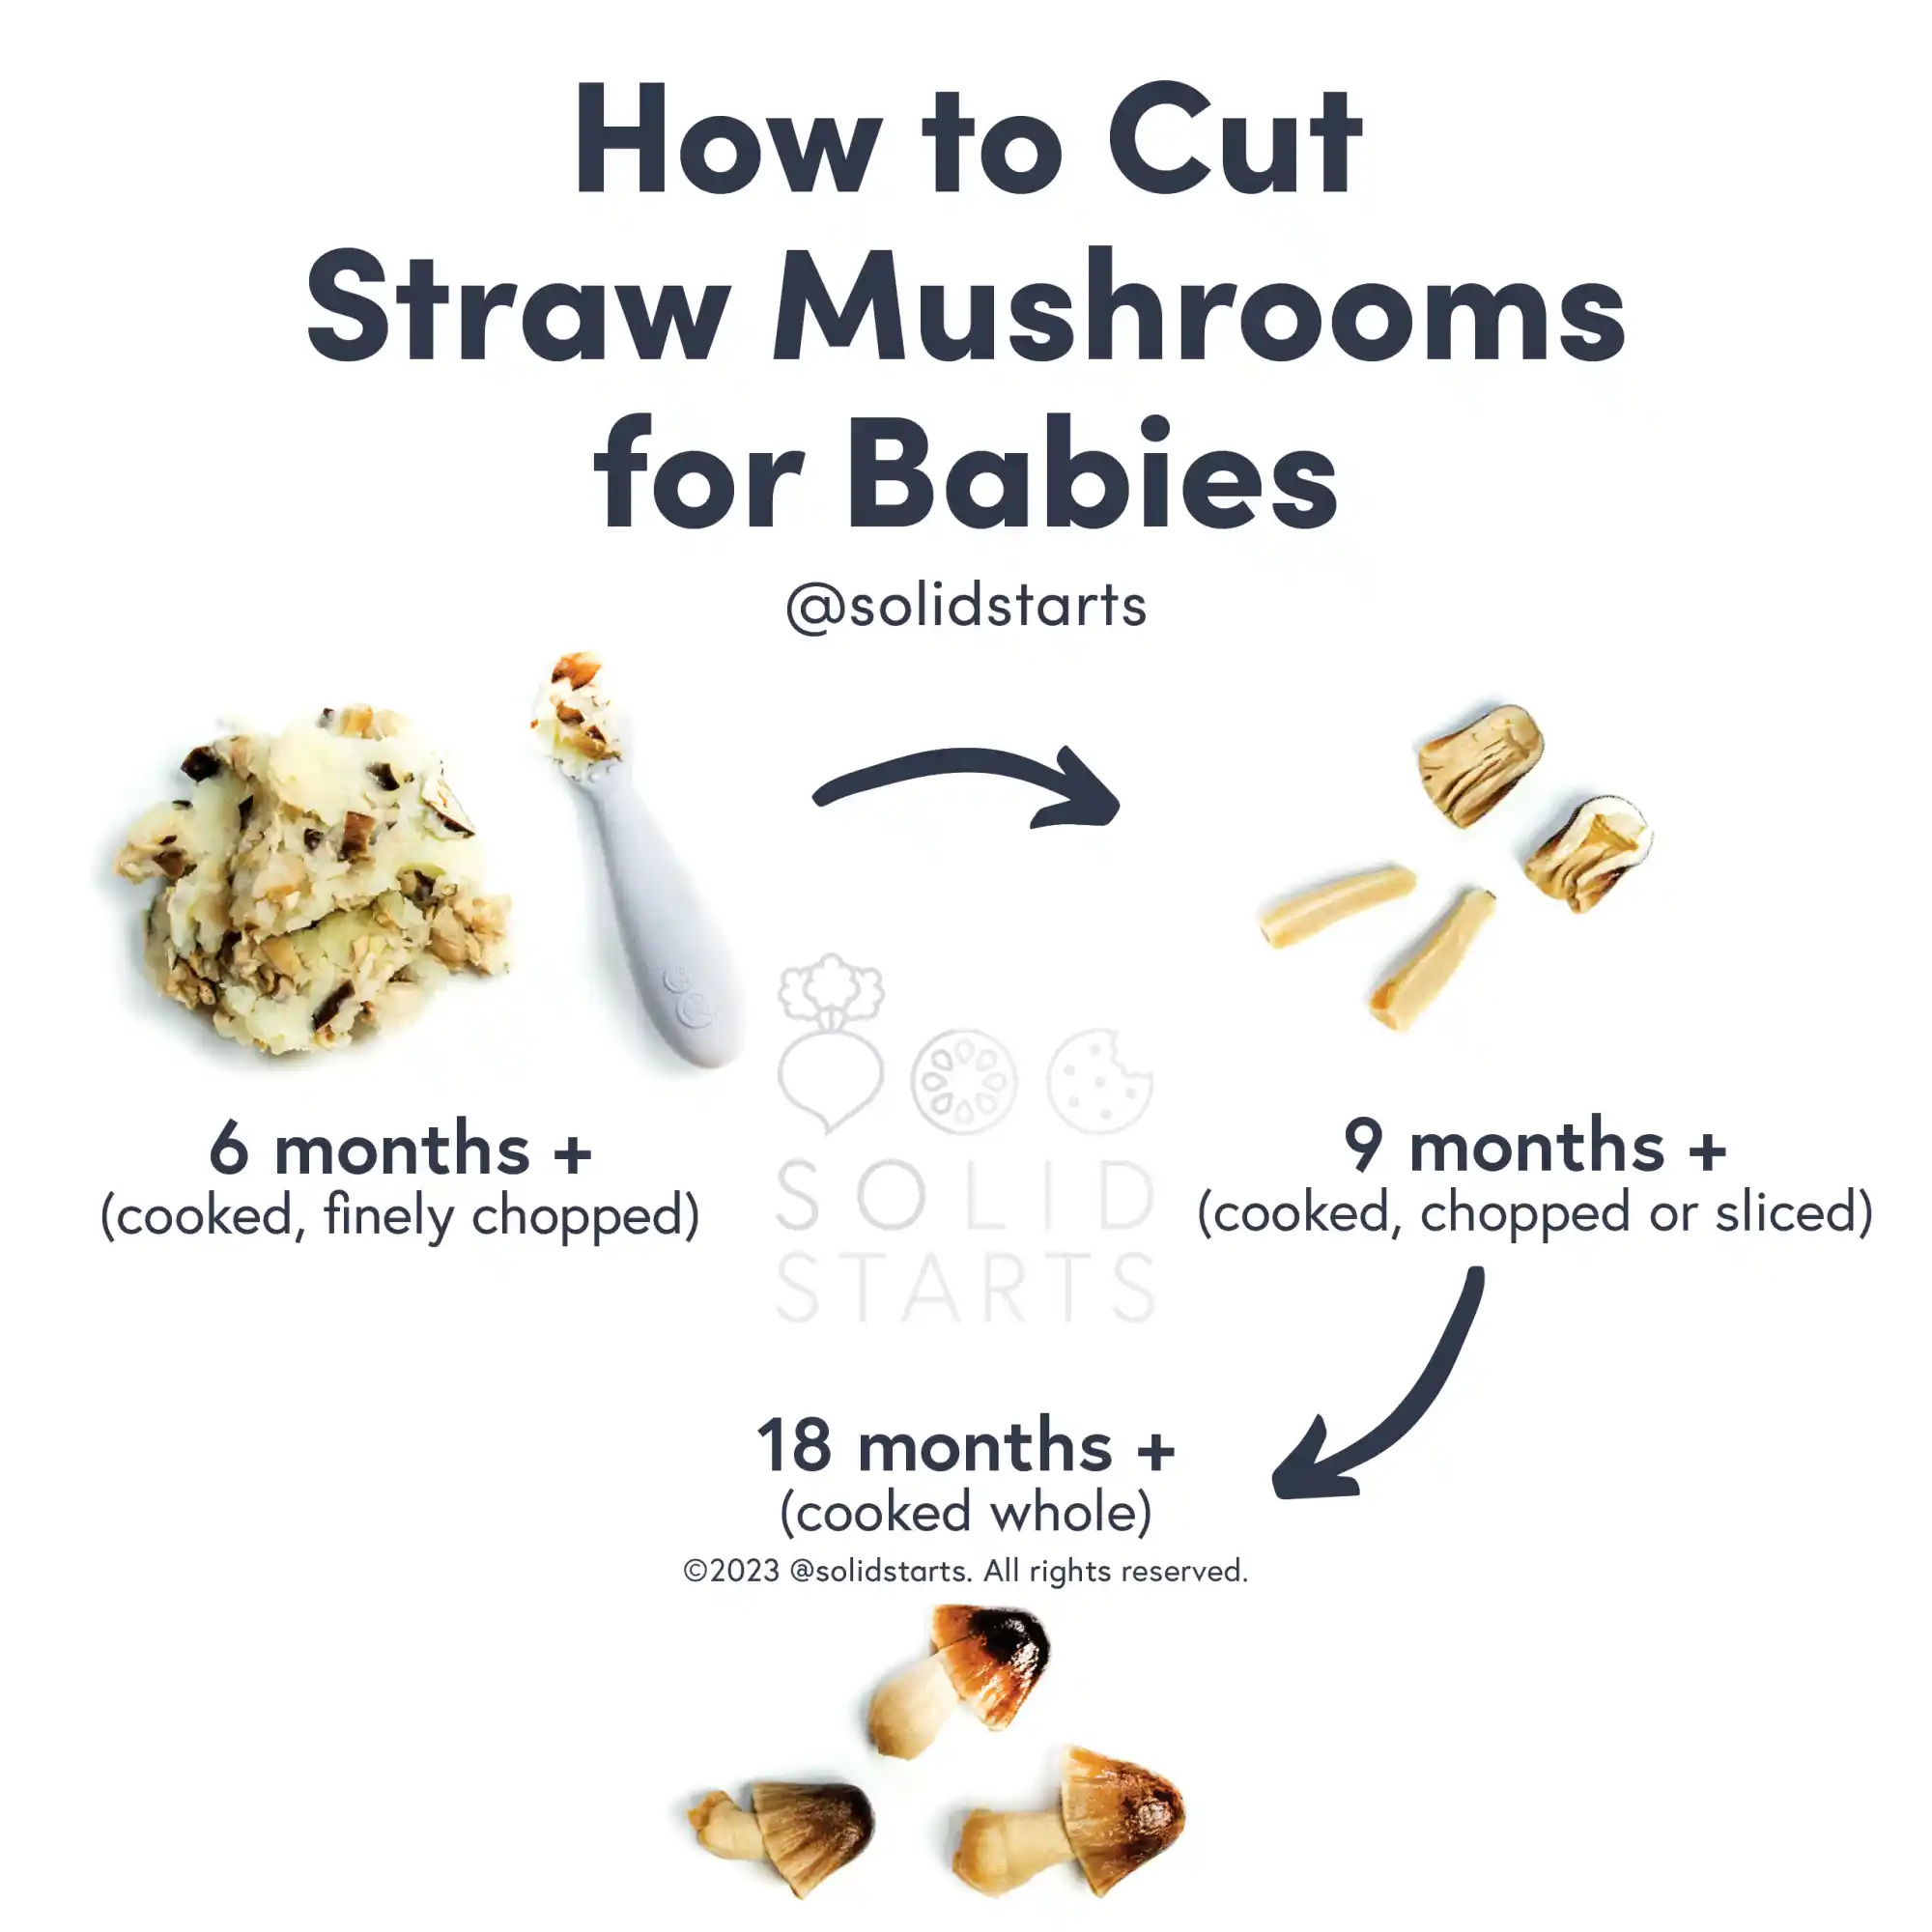 a Solid Starts infographic with the header How to Cut Straw Mushrooms for Babies: finely chopped for 6 mos+, chopped or sliced for 9 mos+, and whole for 18 mos+